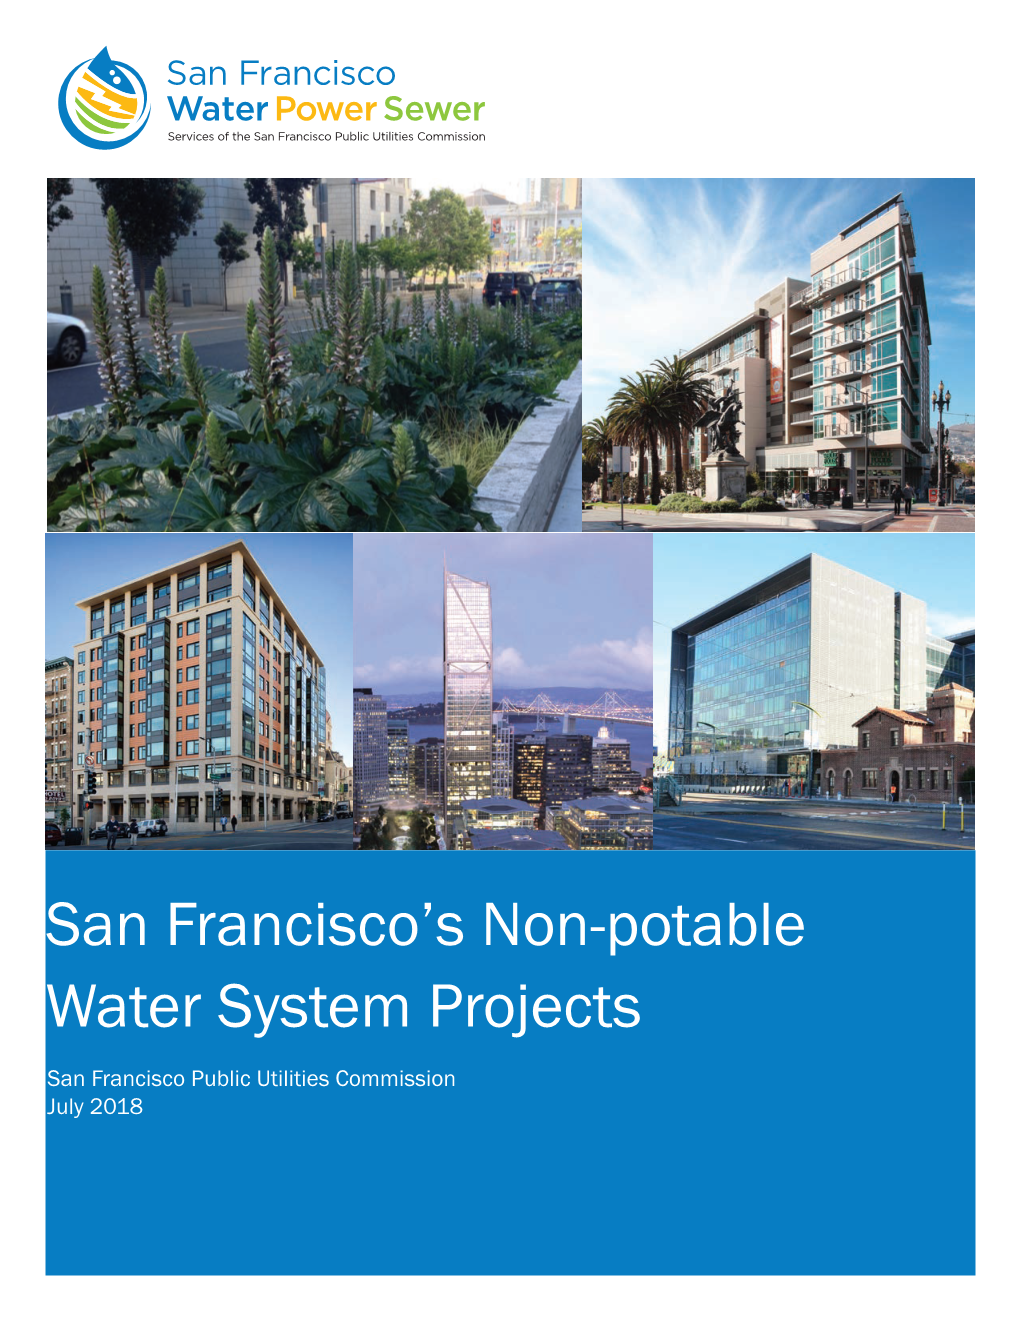 San Francisco's Non-Potable Water System Projects